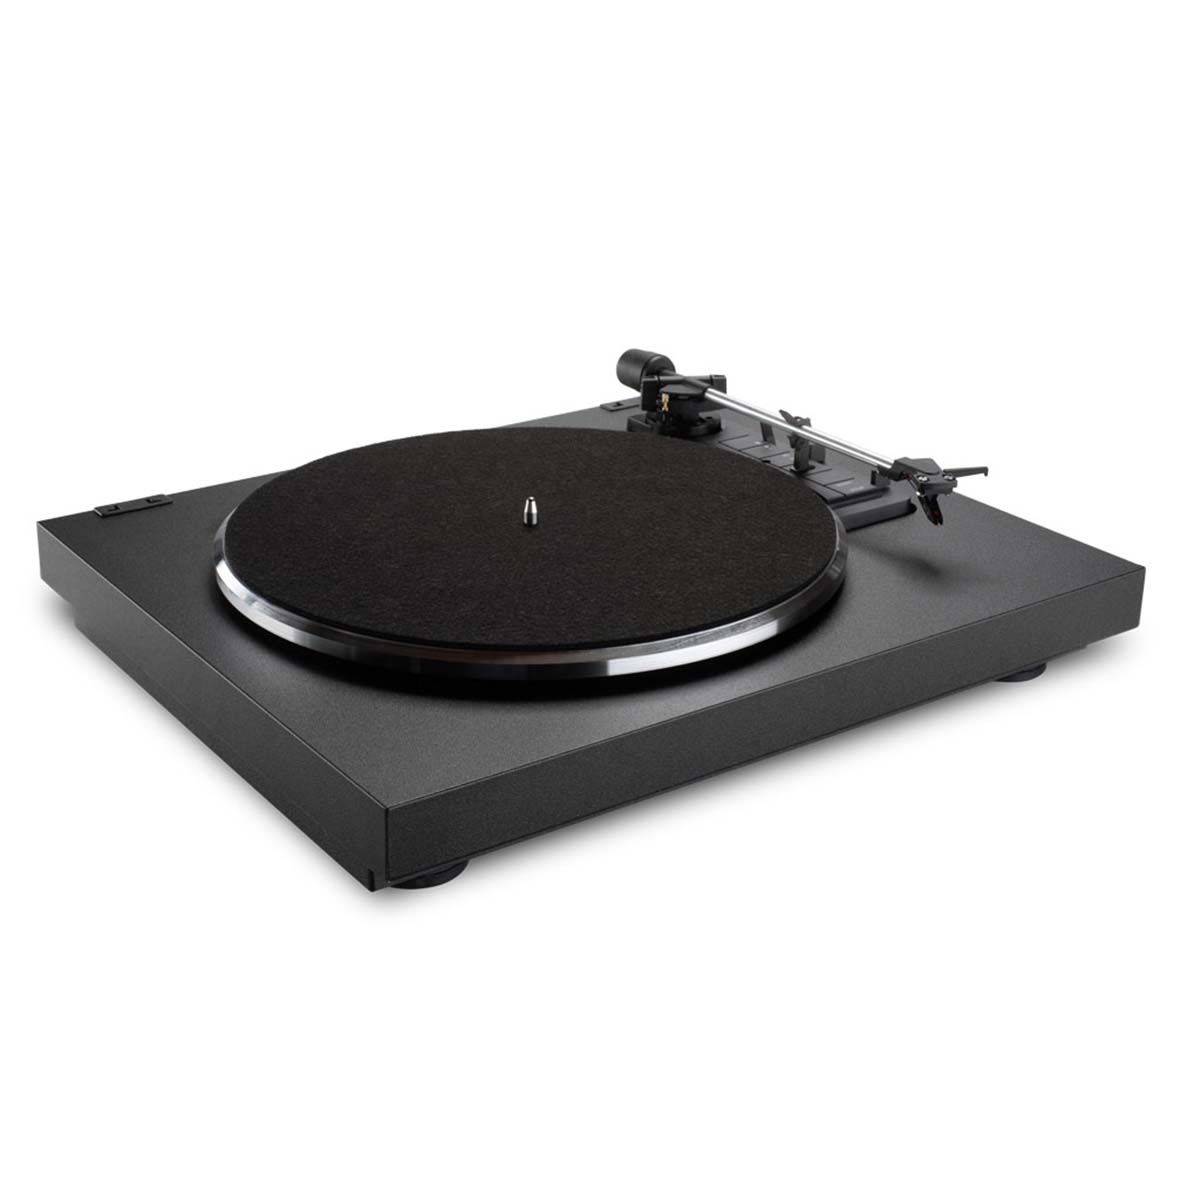 Andover SpinDeck Max Turntable, Black, front angle